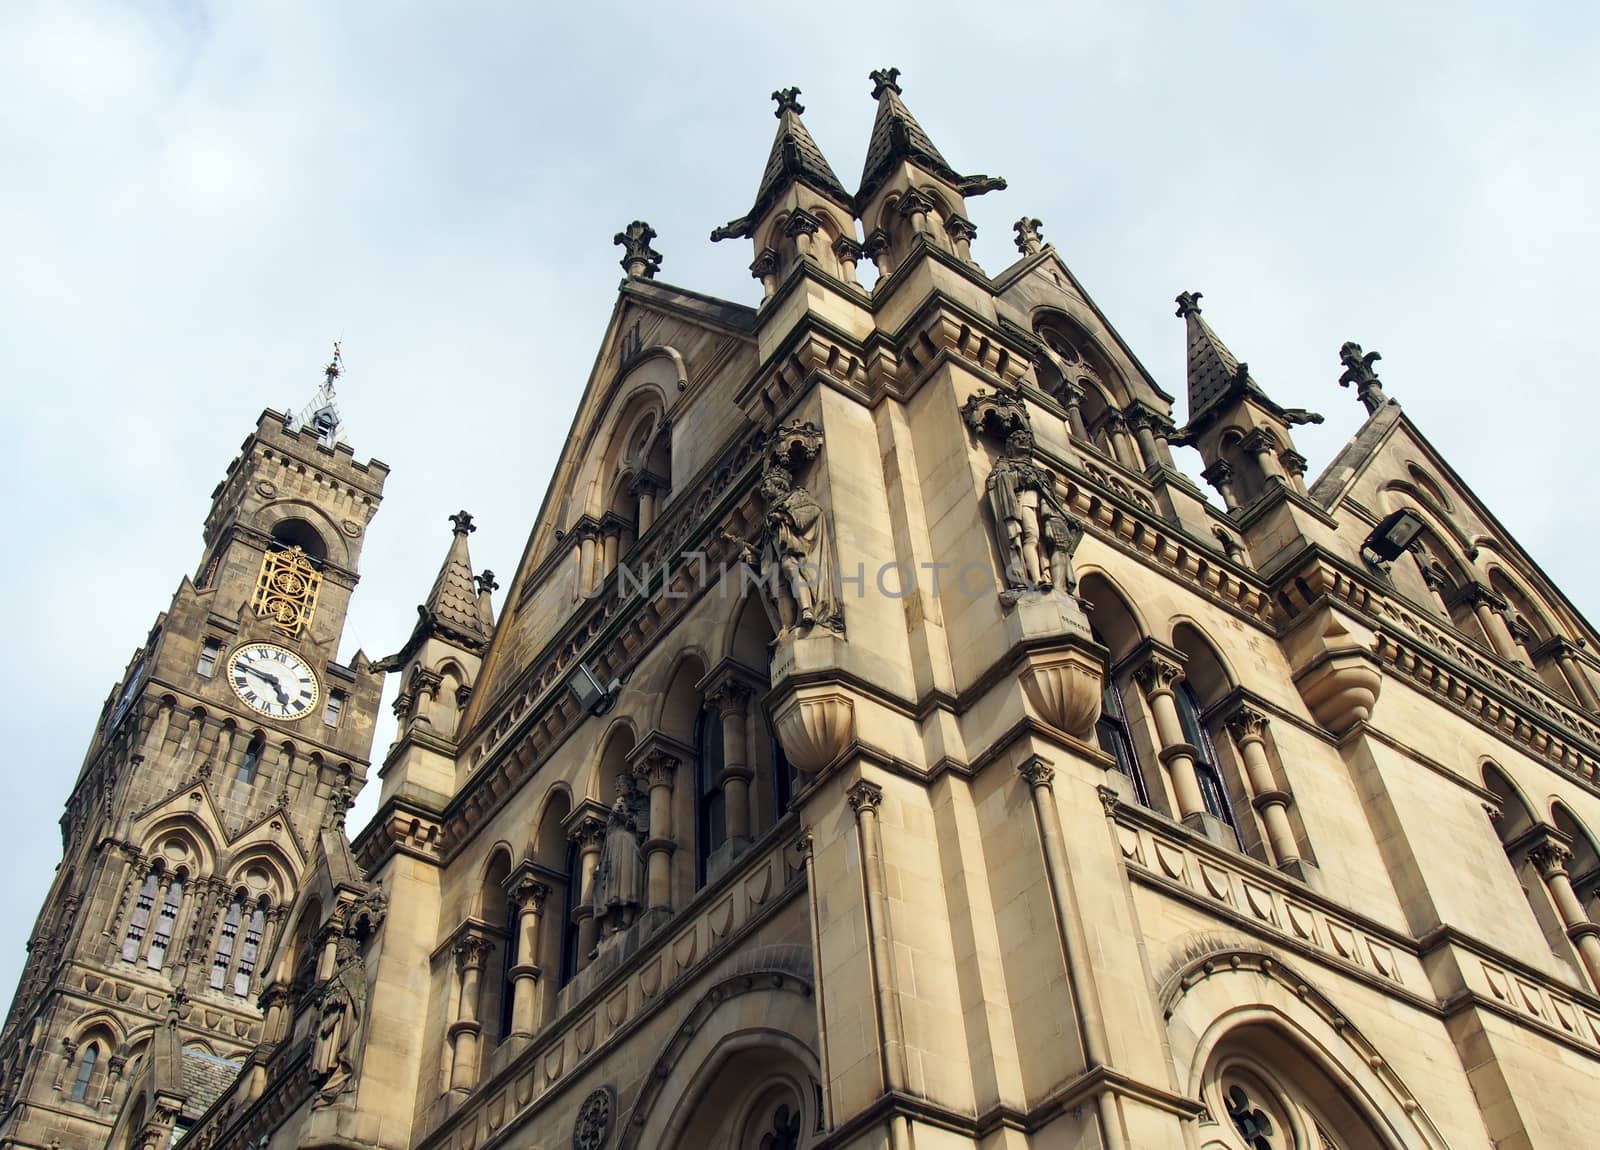 close up view of bradford city hall in west yorkshire a victorian gothic revival sandstone building with statues and clock tower